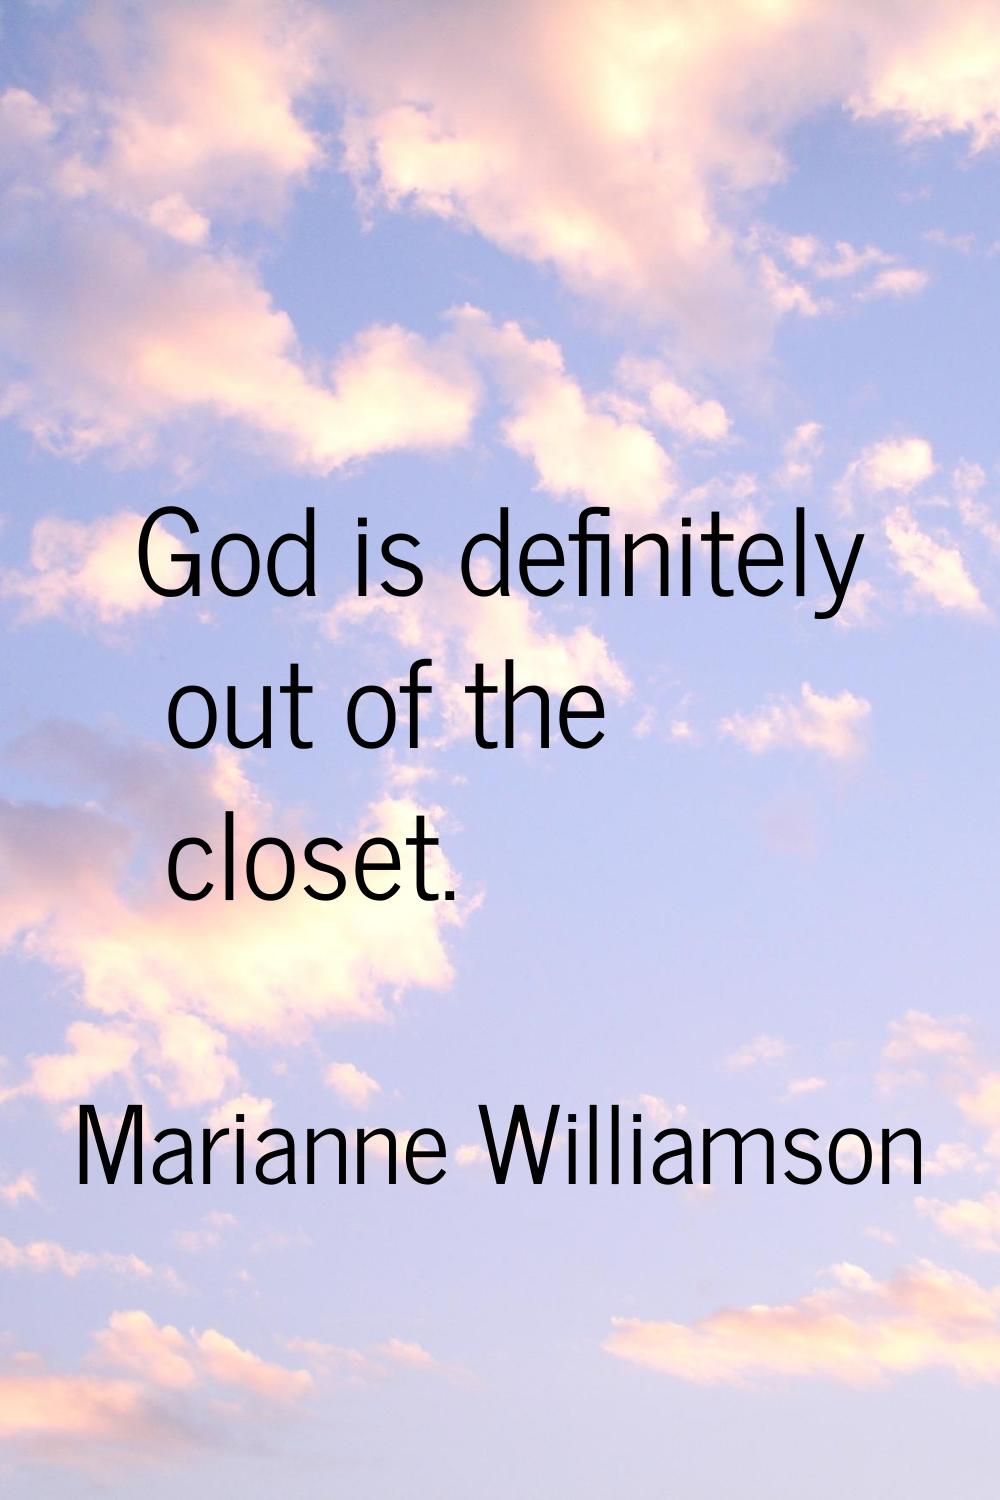 God is definitely out of the closet.